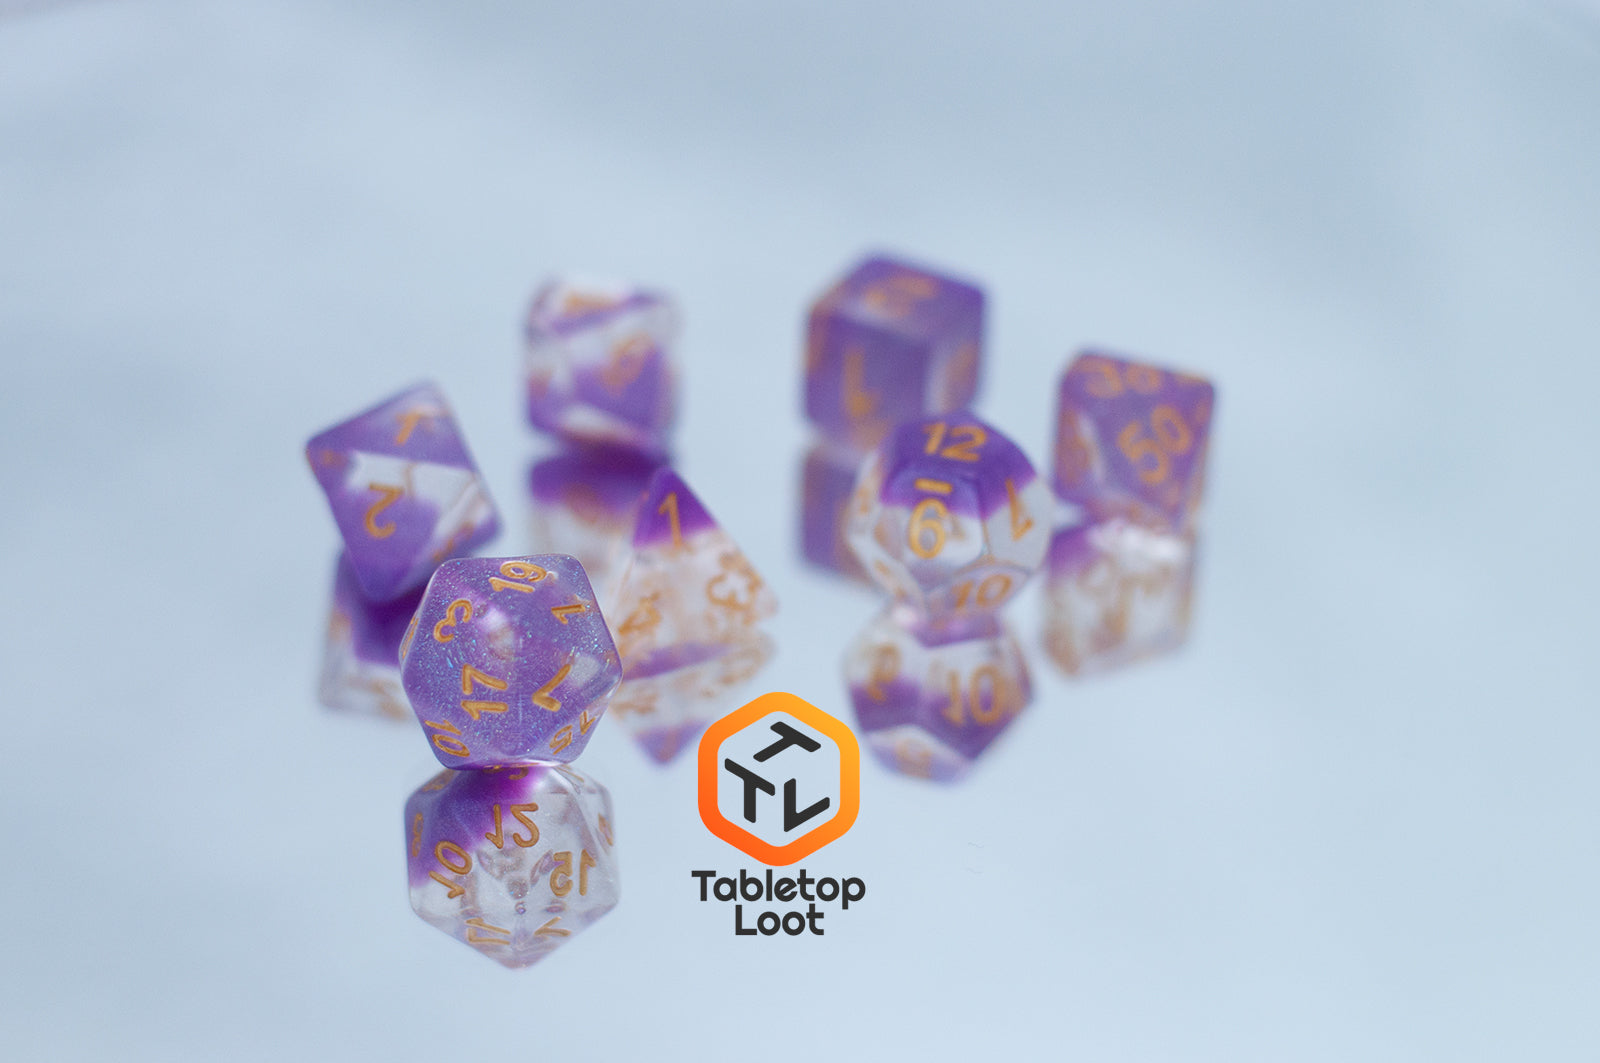 The Gravitational Force 7 piece dice set from Tabletop Loot with a layer of light purple and clear glittery resin.